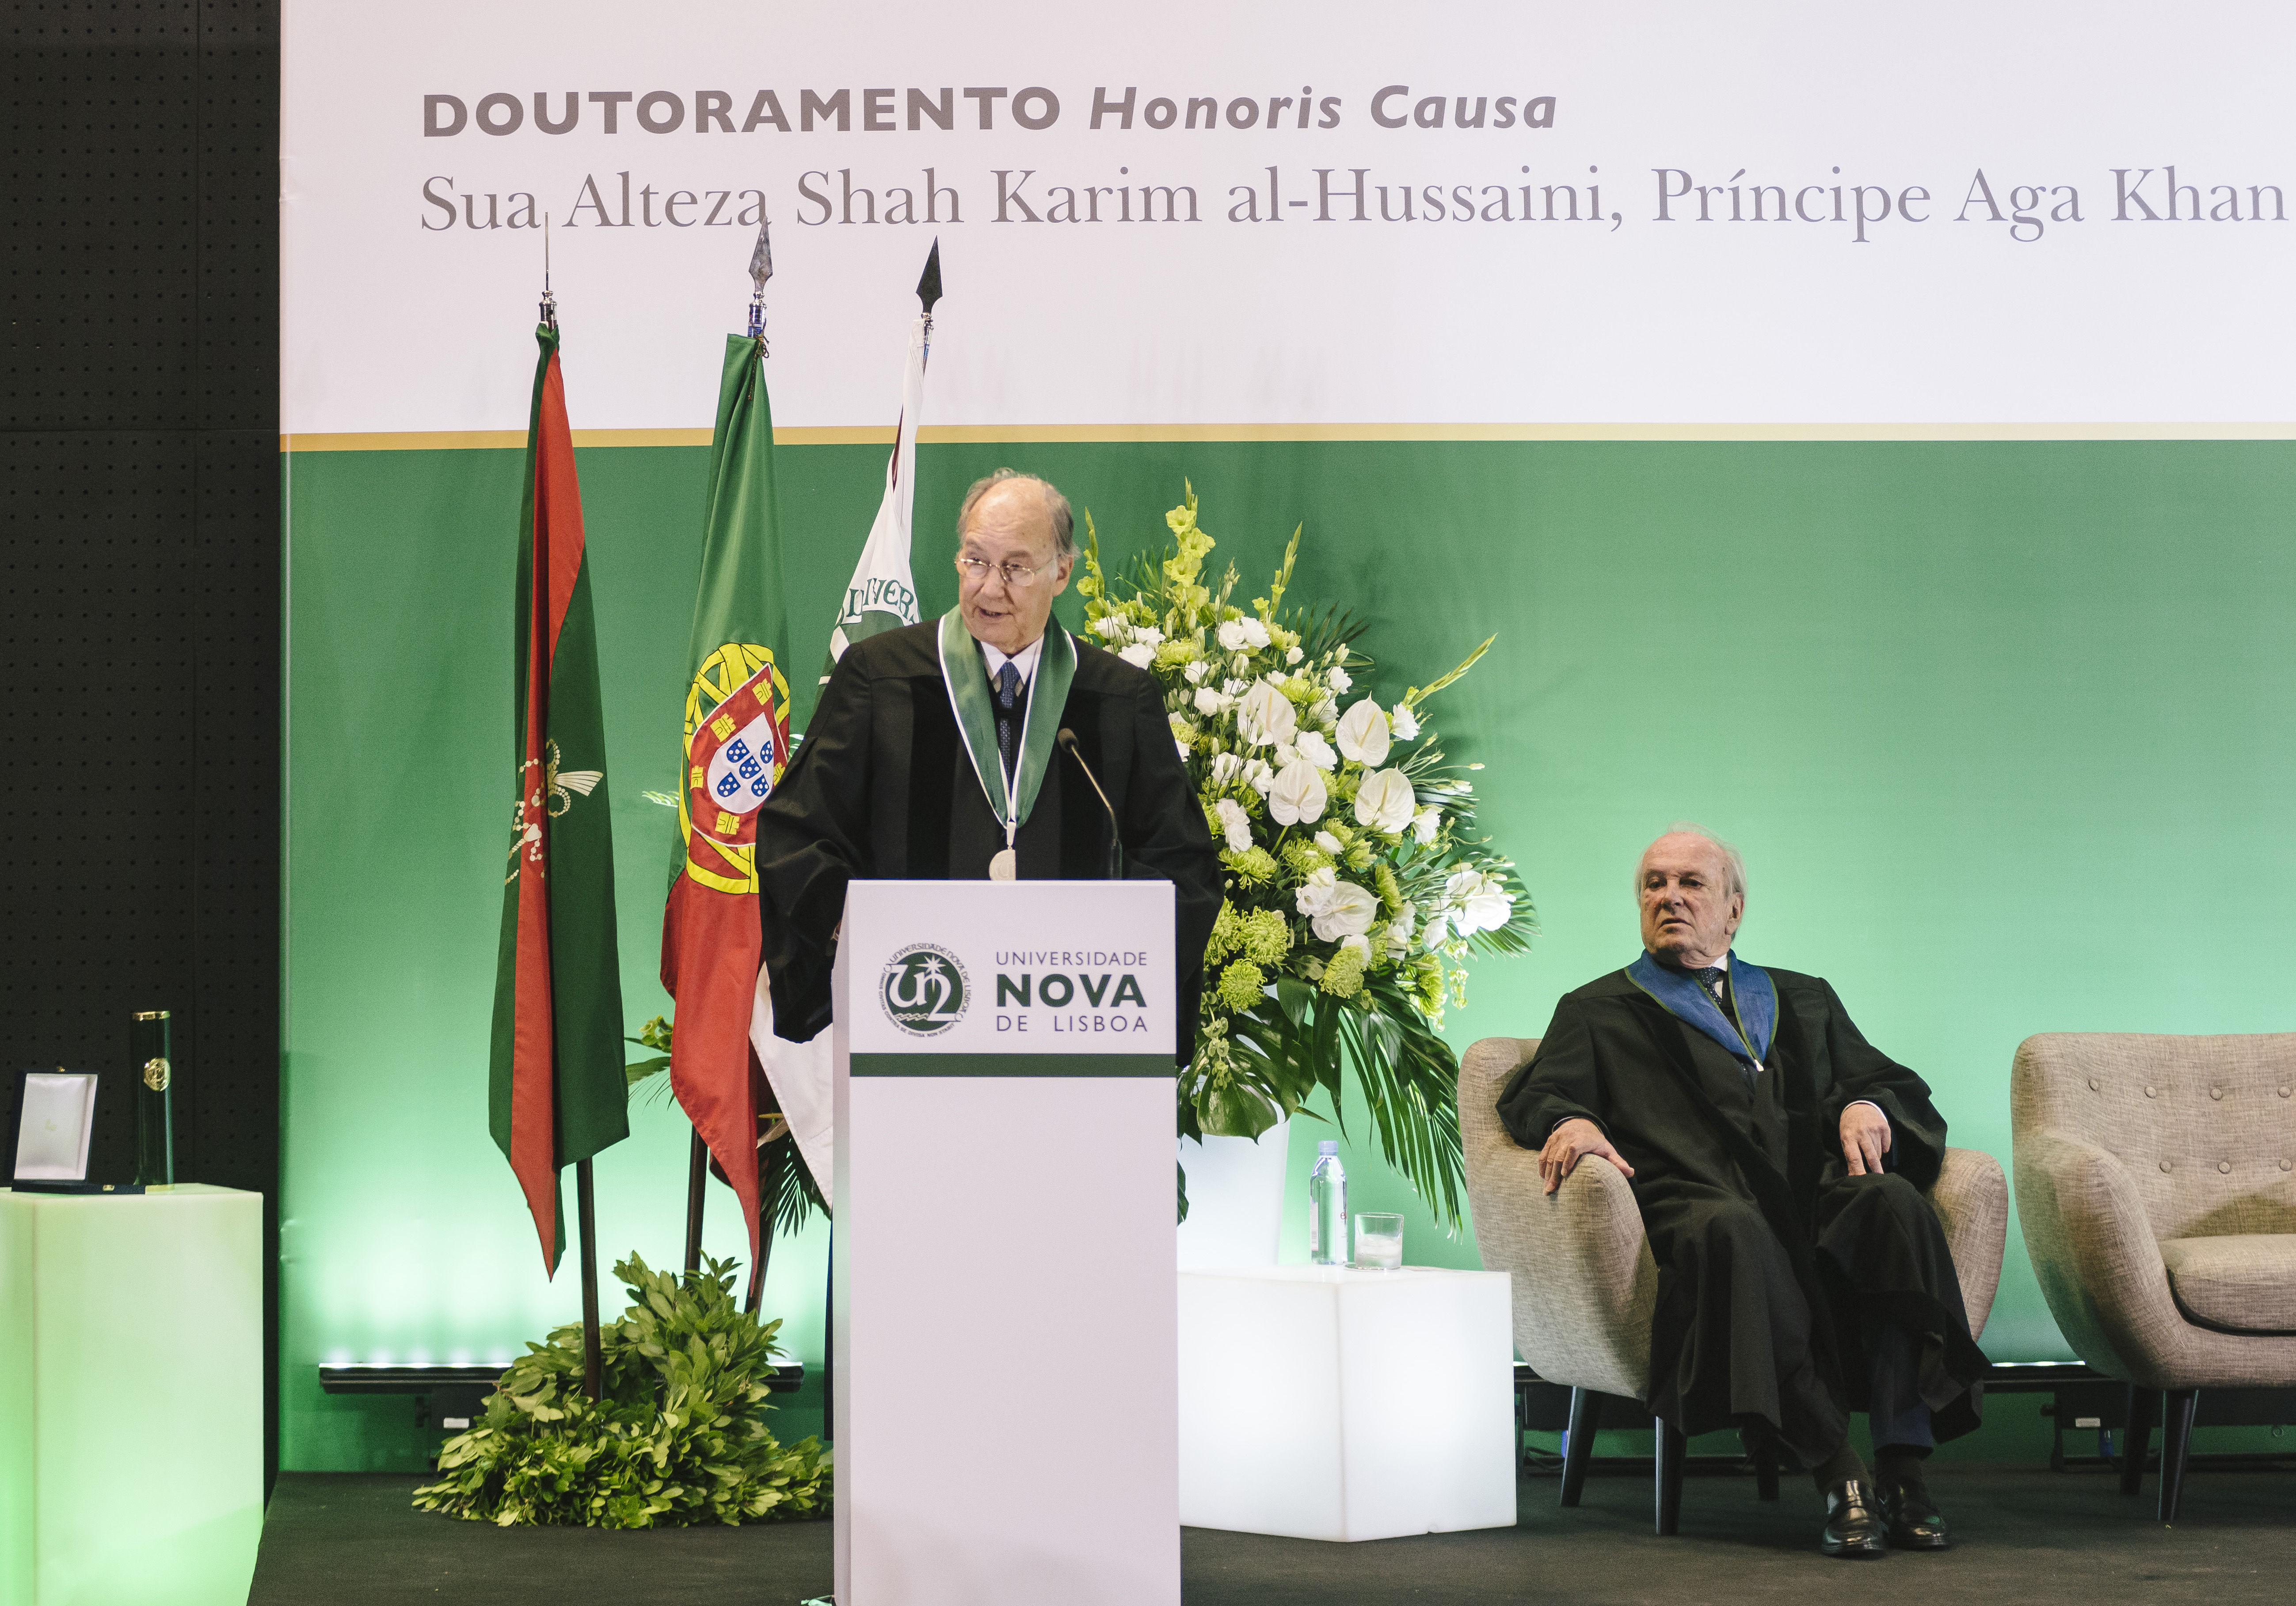 His Highness the Aga Khan delivers his acceptance remarks upon receiving an Honorary Doctorate from Universidade NOVA de Lisboa as Dr. Francisco Pinto Balsemão, Patron of the Doctorate looks on. | AKDN/Antonio Pedrosa